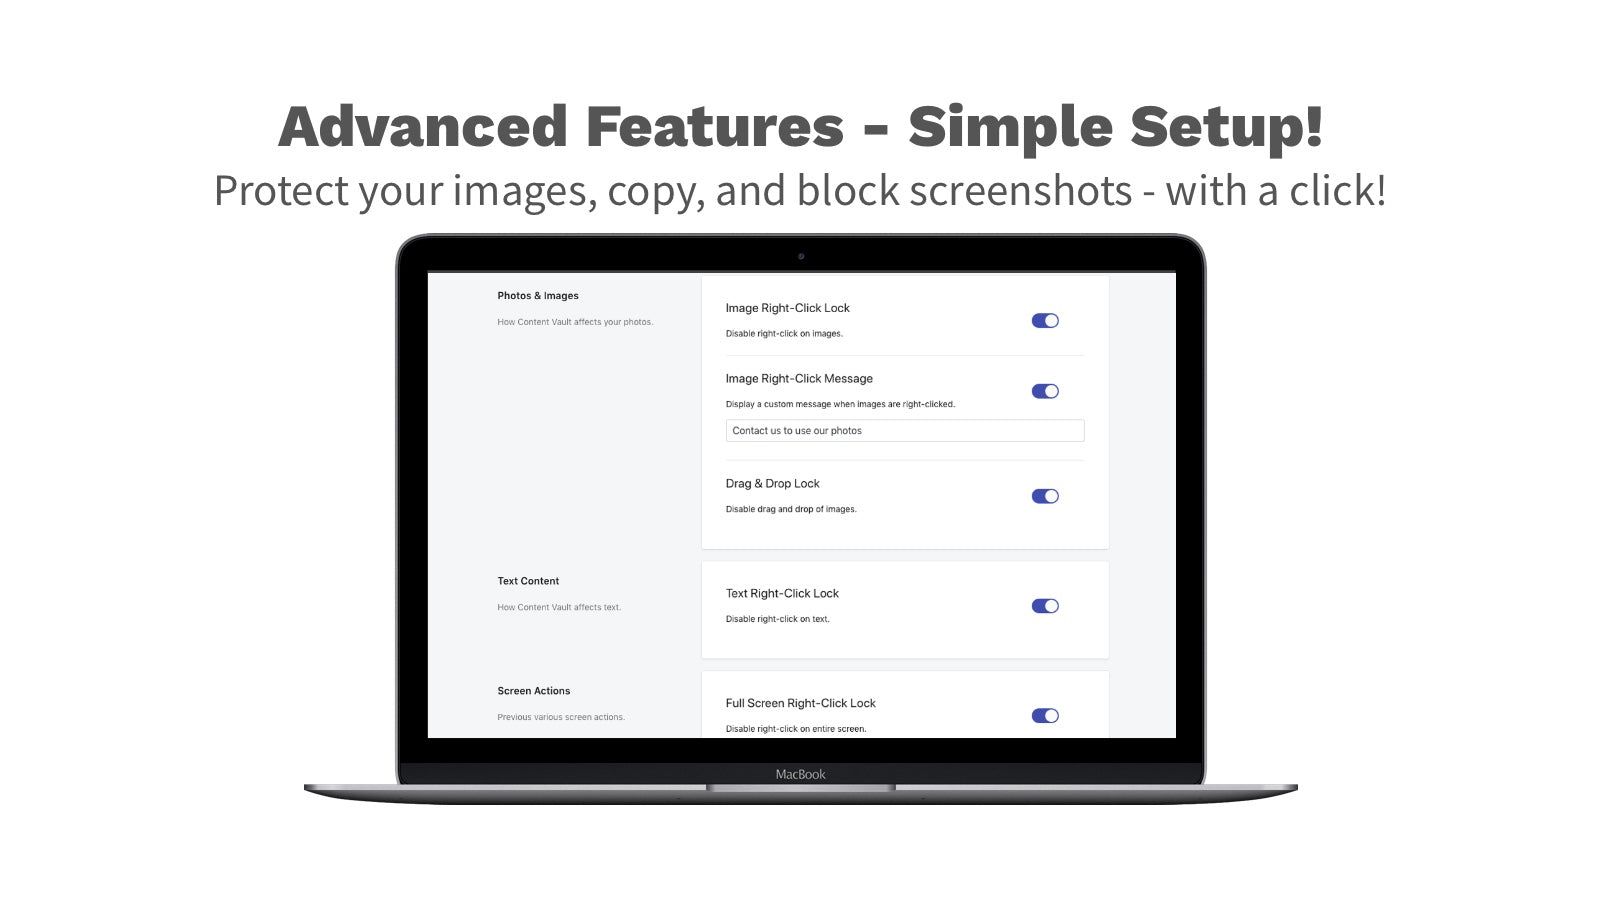 Advanced features - protect images, copy and block screenshots